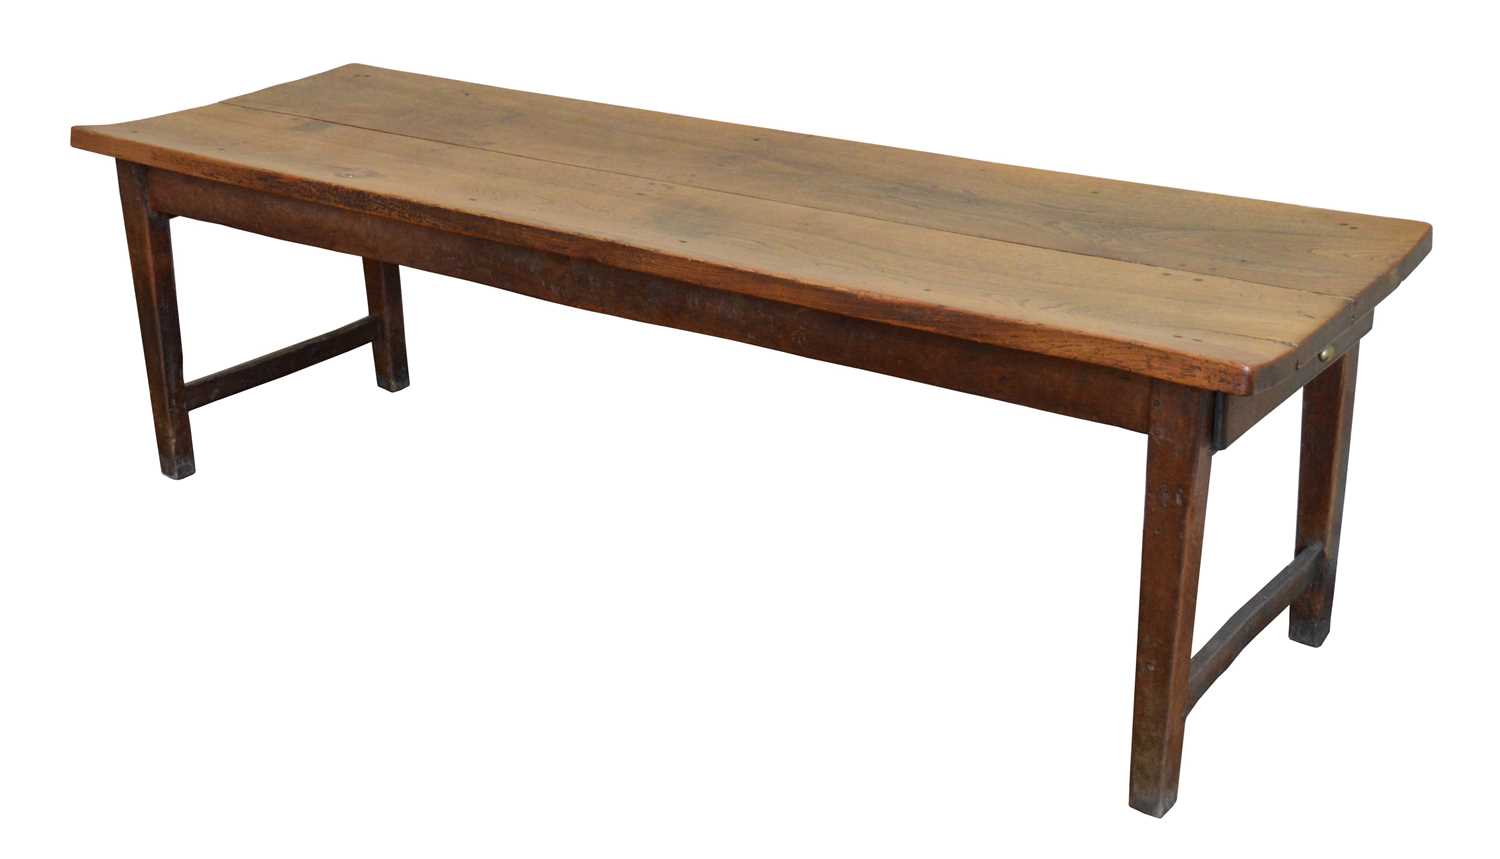 407 - Early 19th-century refectory table